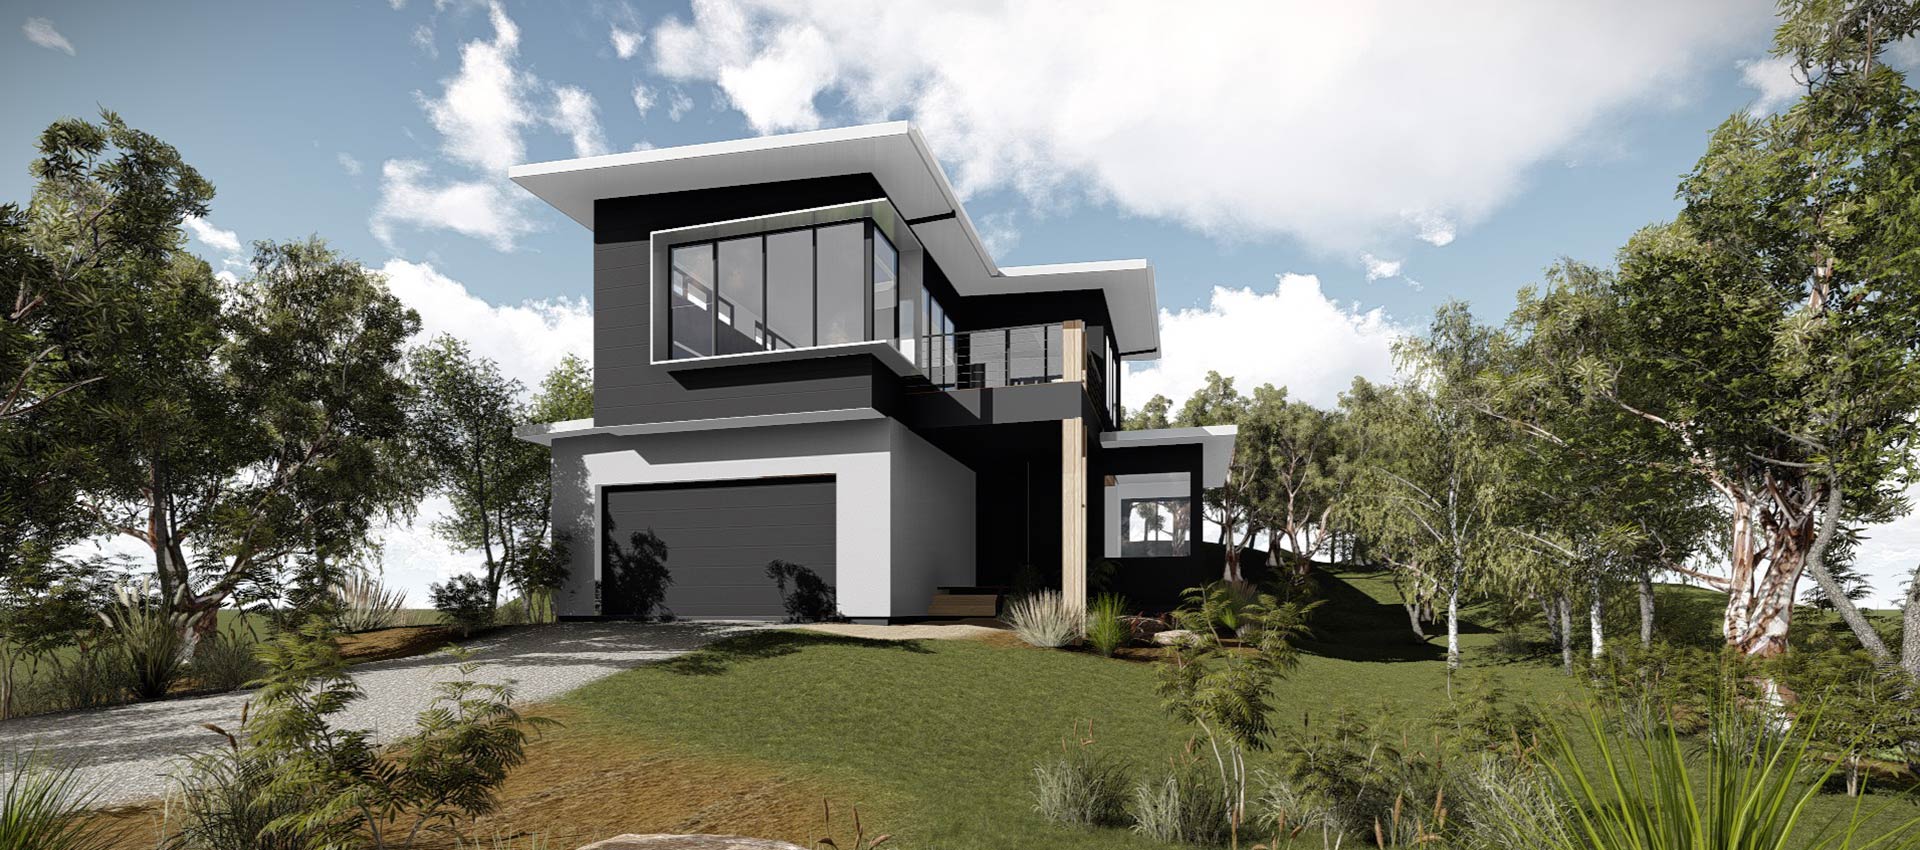 Airleys Inlet 30 Double Storey House Design 1